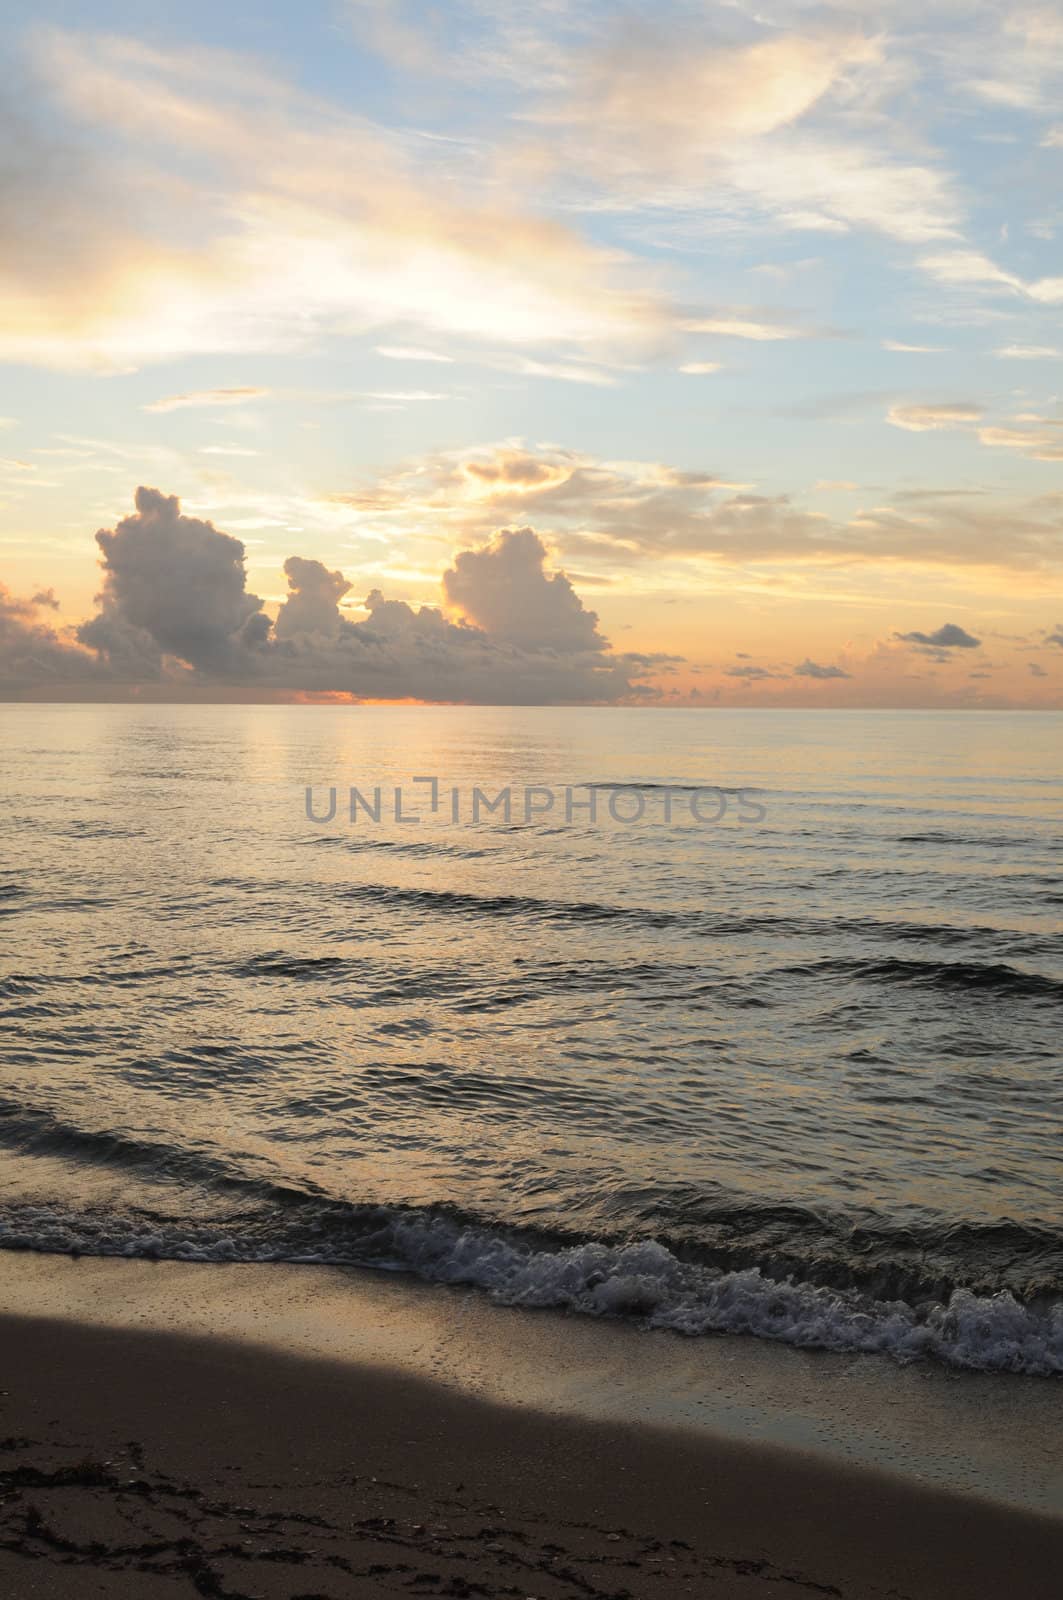 
Tropical sunrise over ocean in the early morning